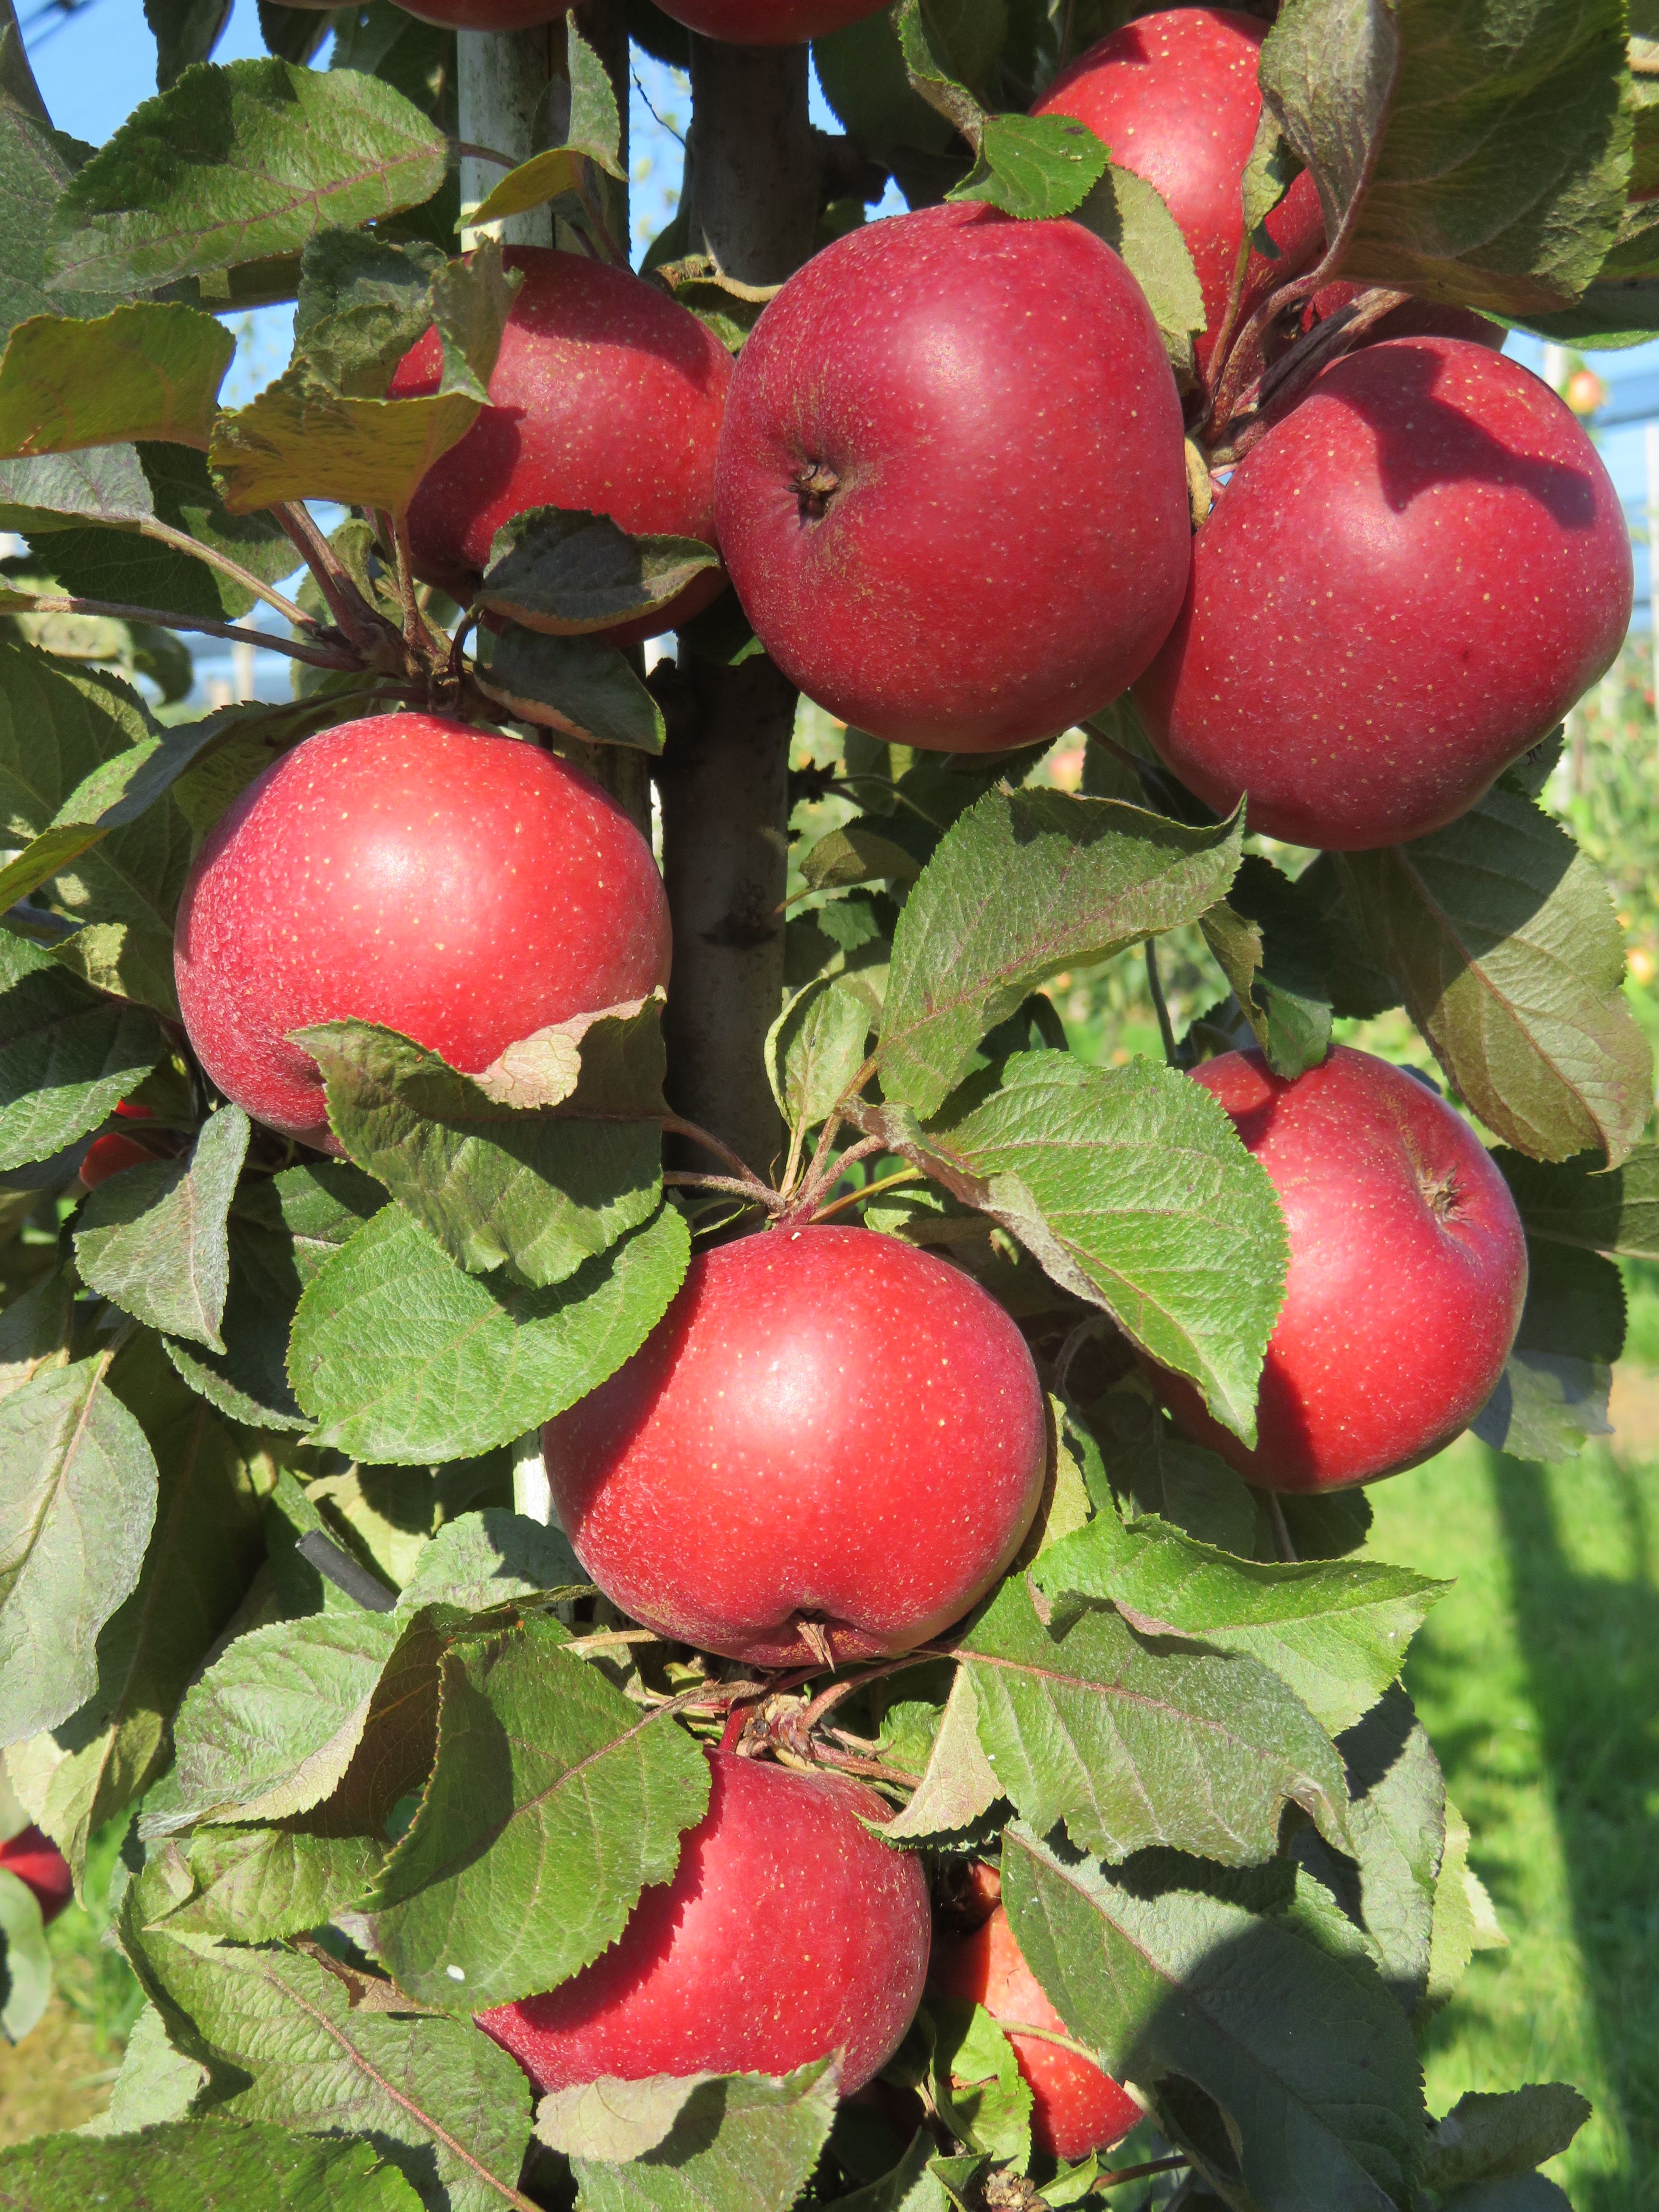 images/plants/malus/mal-all-red/mal-all-red-0009.jpg